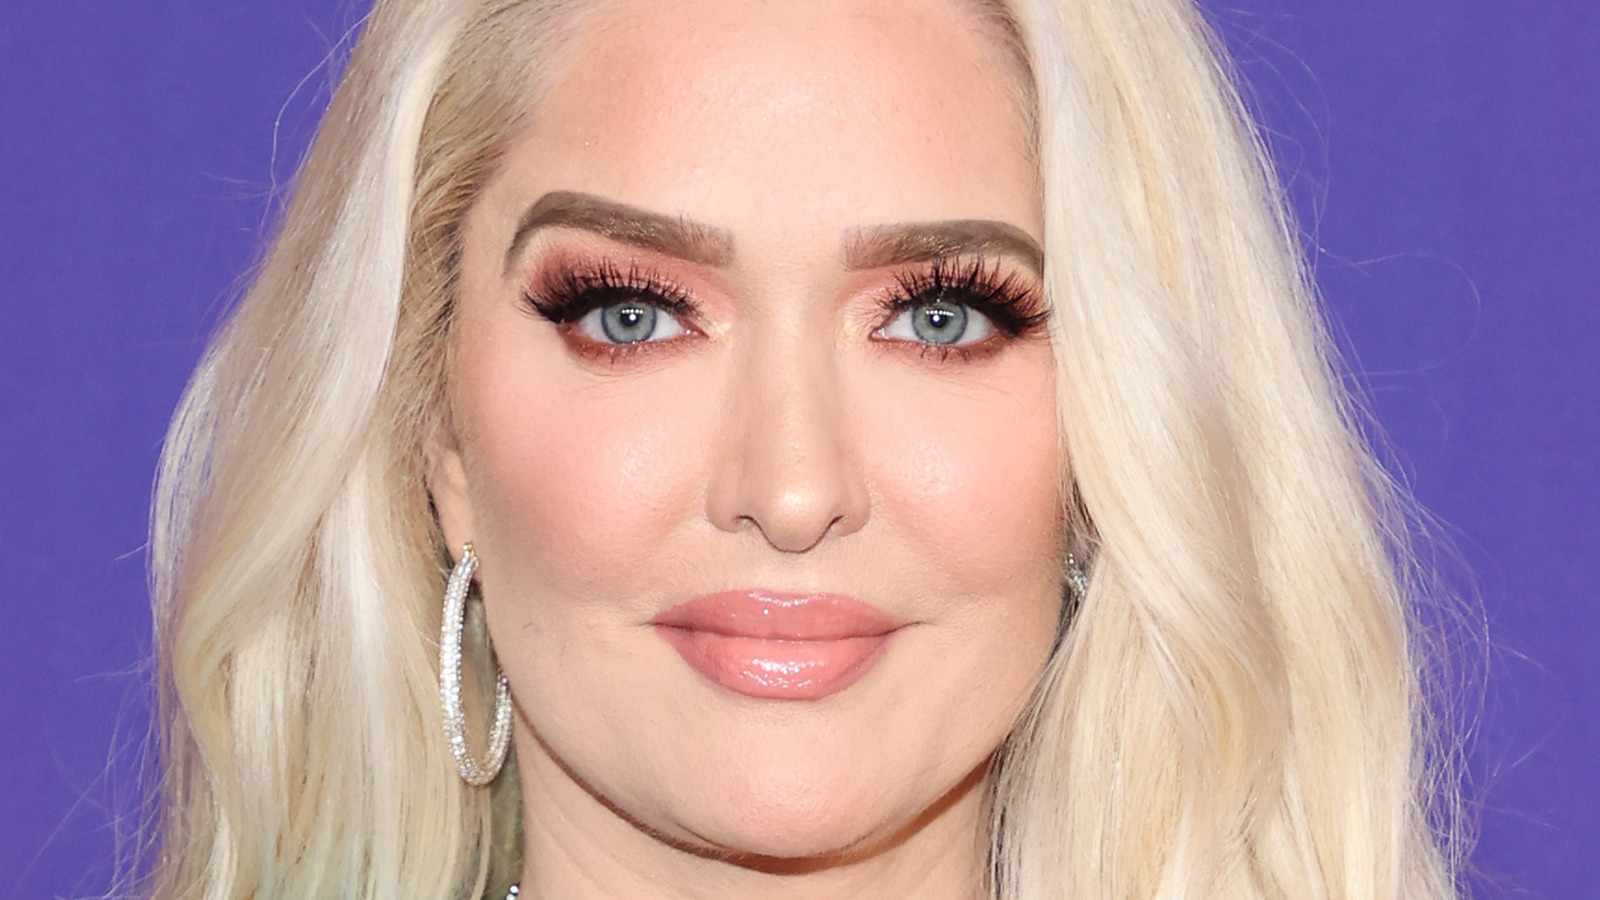 The Truth About Erika Jayne And Tom Girardi's Relationship